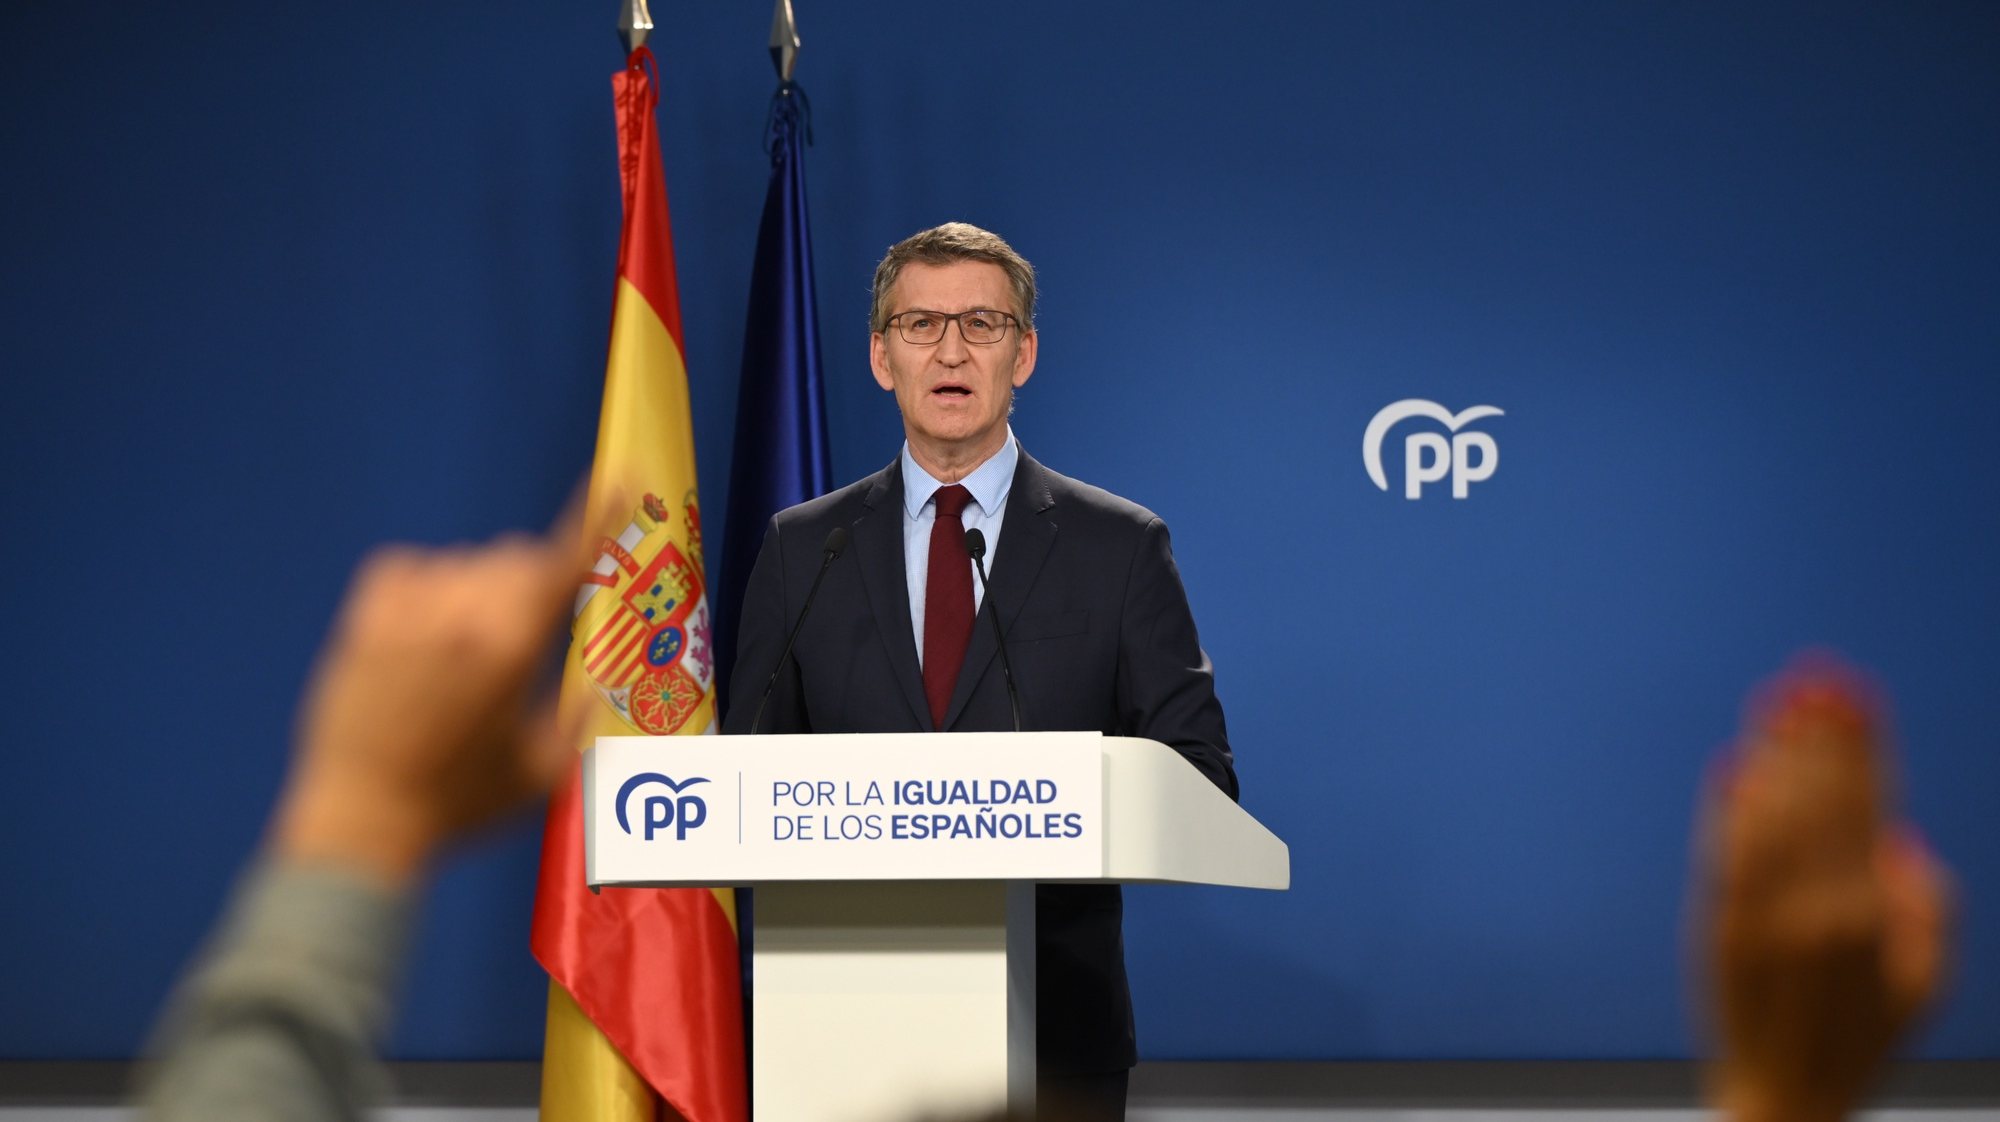 epa11299781 Leader of the Spanish People&#039;s Party (PP) Alberto Nunez Feijoo addresses a press conference on the possible resignation of Spain&#039;s prime minister at the party&#039;s headquarters in Madrid, Spain, 25 April 2024. According to Feijoo, it is an &#039;unacceptable frivolity&#039; that Sanchez has decided to take 5 days off to think about his resignation, adding that it is an insult to voters. Spain&#039;s Prime Minister Pedro Sanchez published on 24 April 2024 on &#039;X&#039; social media a letter to the citizens in which he explains he would be taking some days off to think about resignation after it was announced that his wife, Begona Gomez, was to be investigated after right wing union &#039;Manos Limpias&#039; filed a complaint against her. Sanchez blames a political &#039;harassment and bullying operation by land, air and sea&#039; to cause his &#039;personal and political collapse&#039; by attacking his wife. In the letter he announces he will communicate his decision next 29 April 2024.  EPA/FERNANDO VILLAR